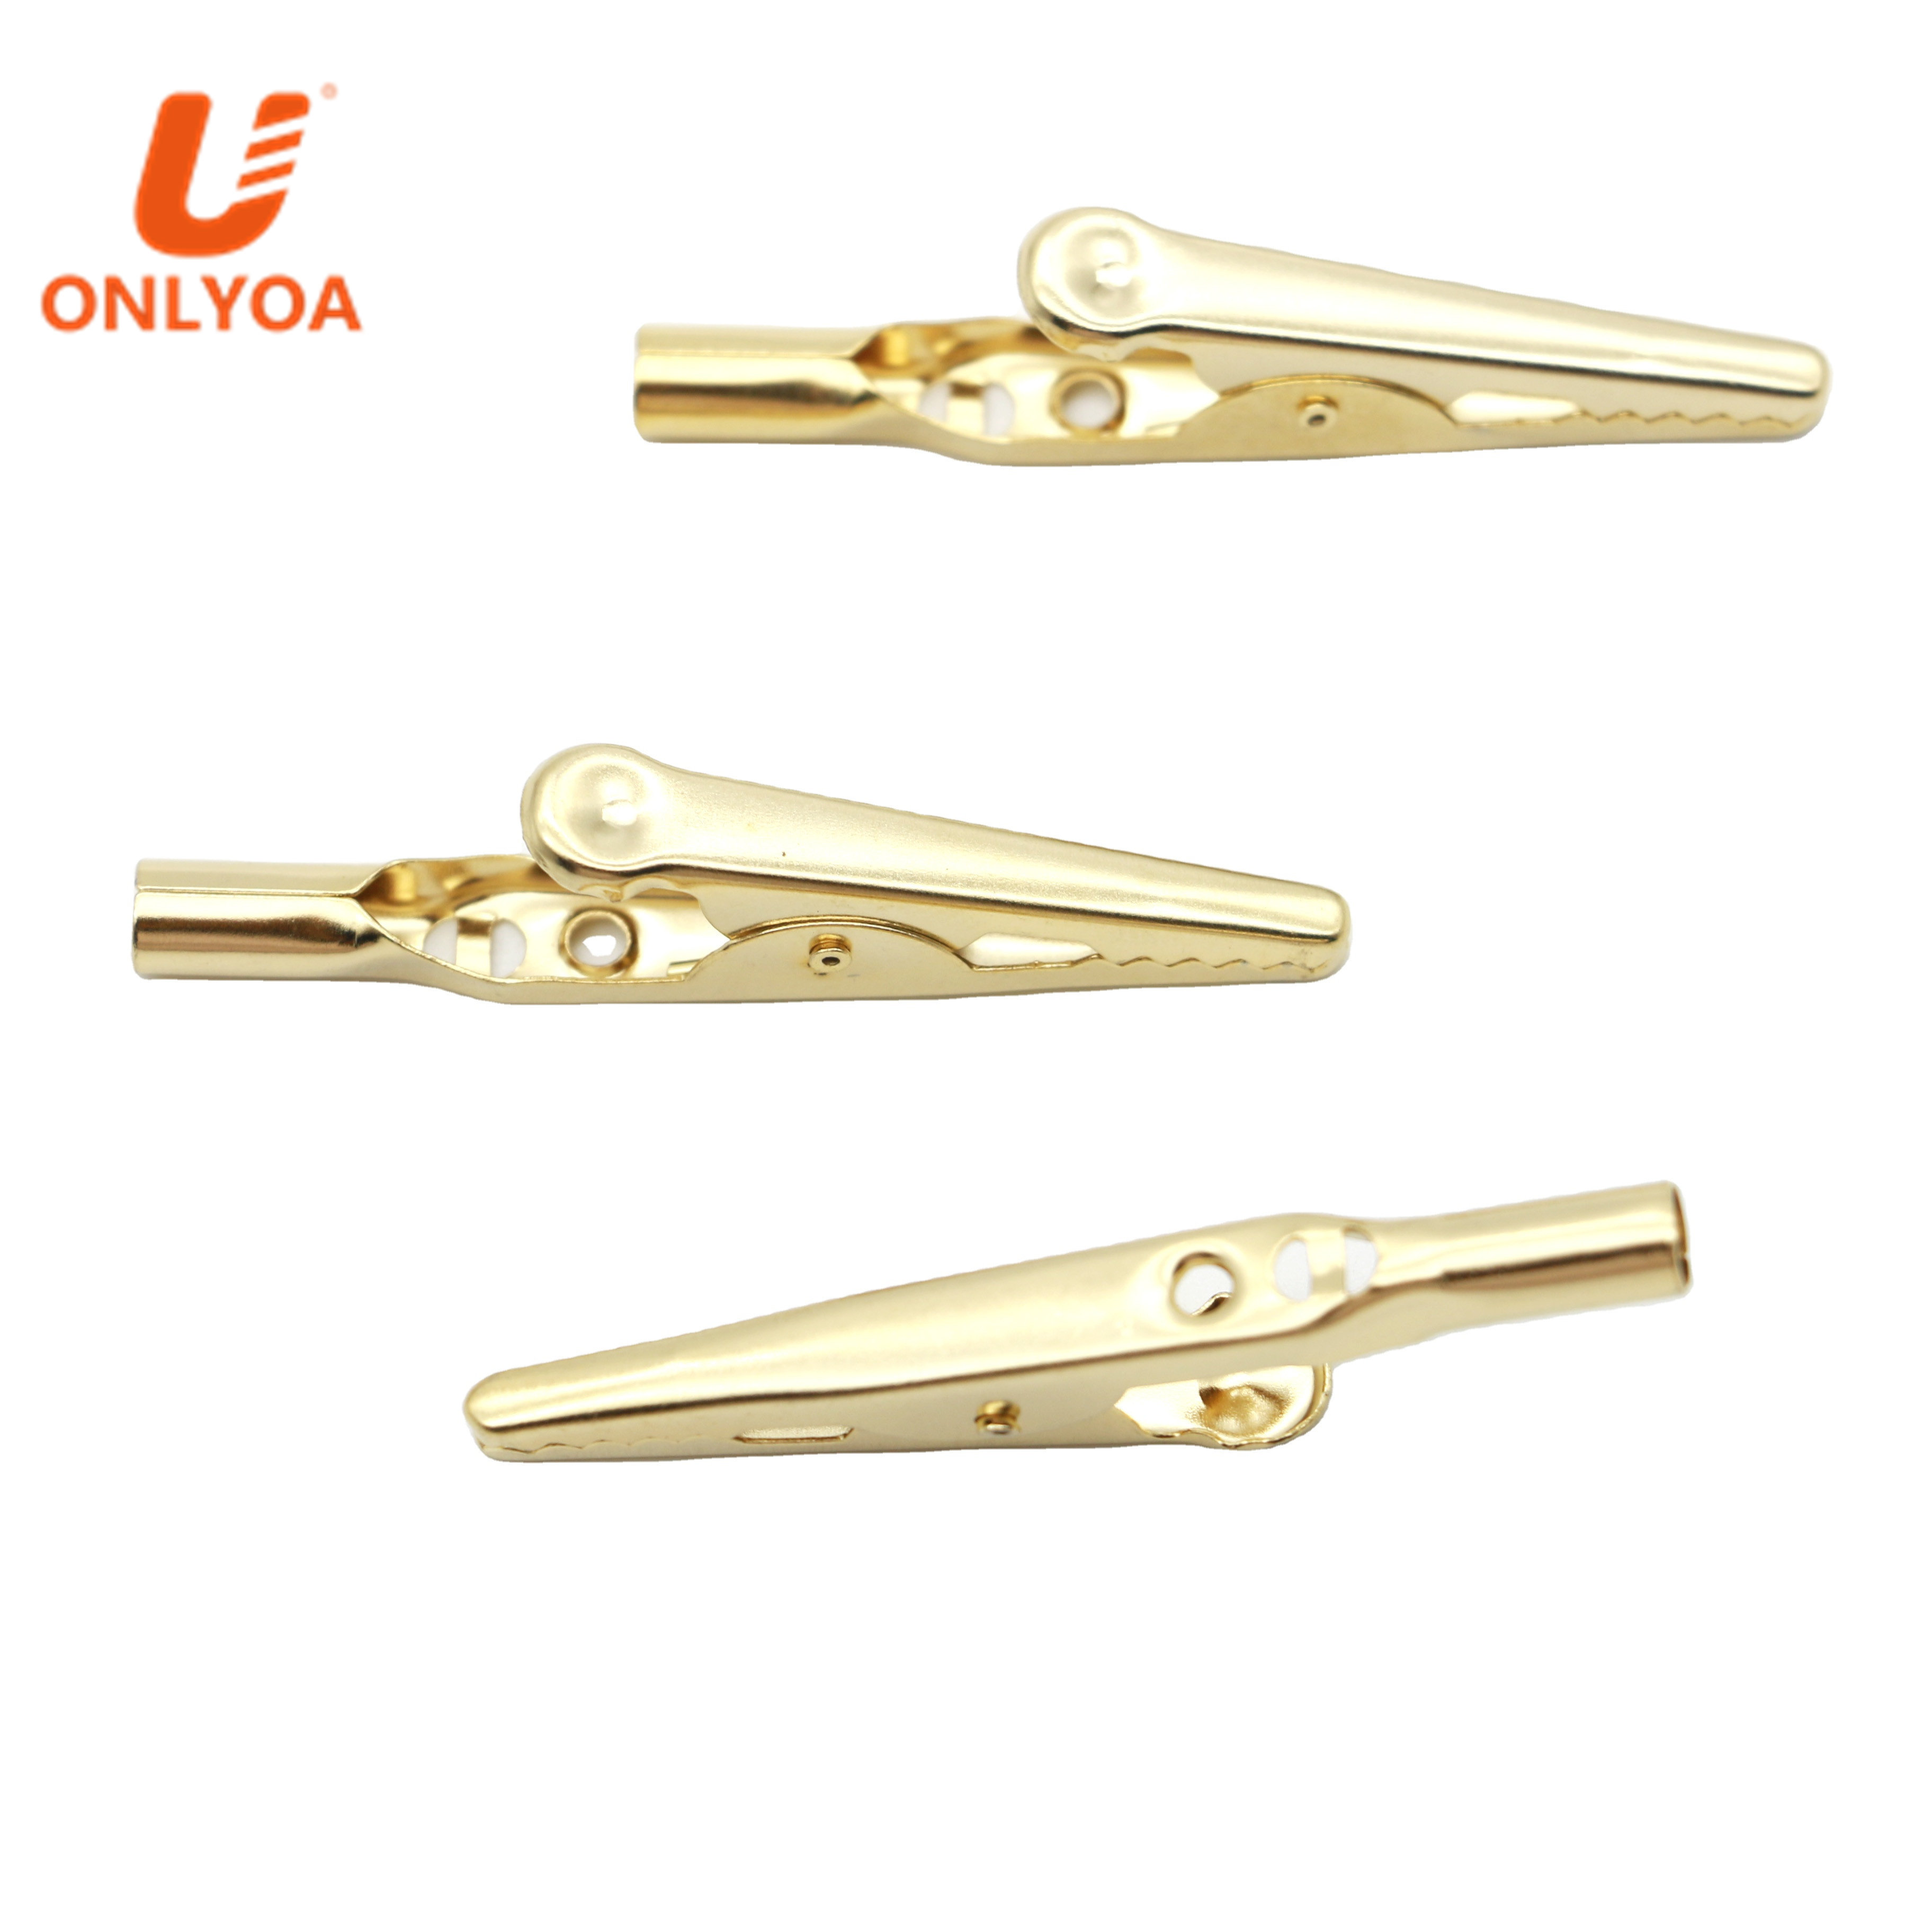 ONLYOA High quality in-line 4mm banana plug 50mm 5A Golden plating alligator battery clip test crocodile clamp